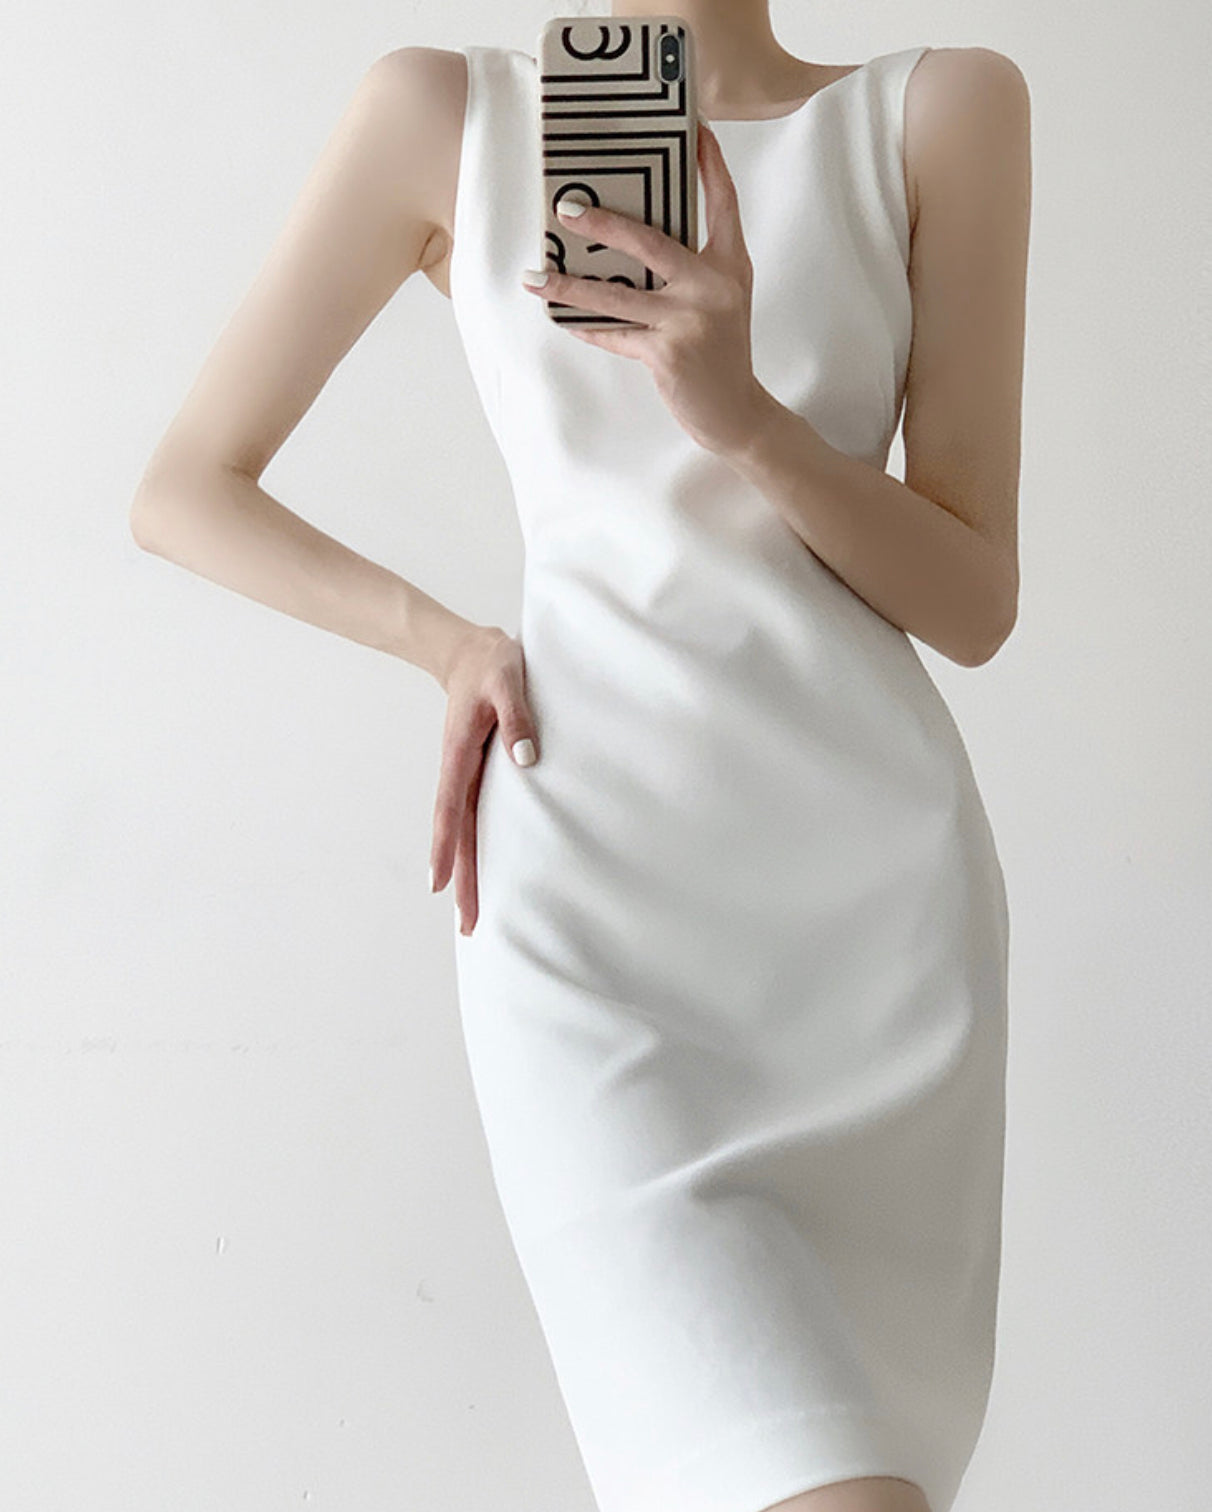 Airey Gathered Tank Dress in White